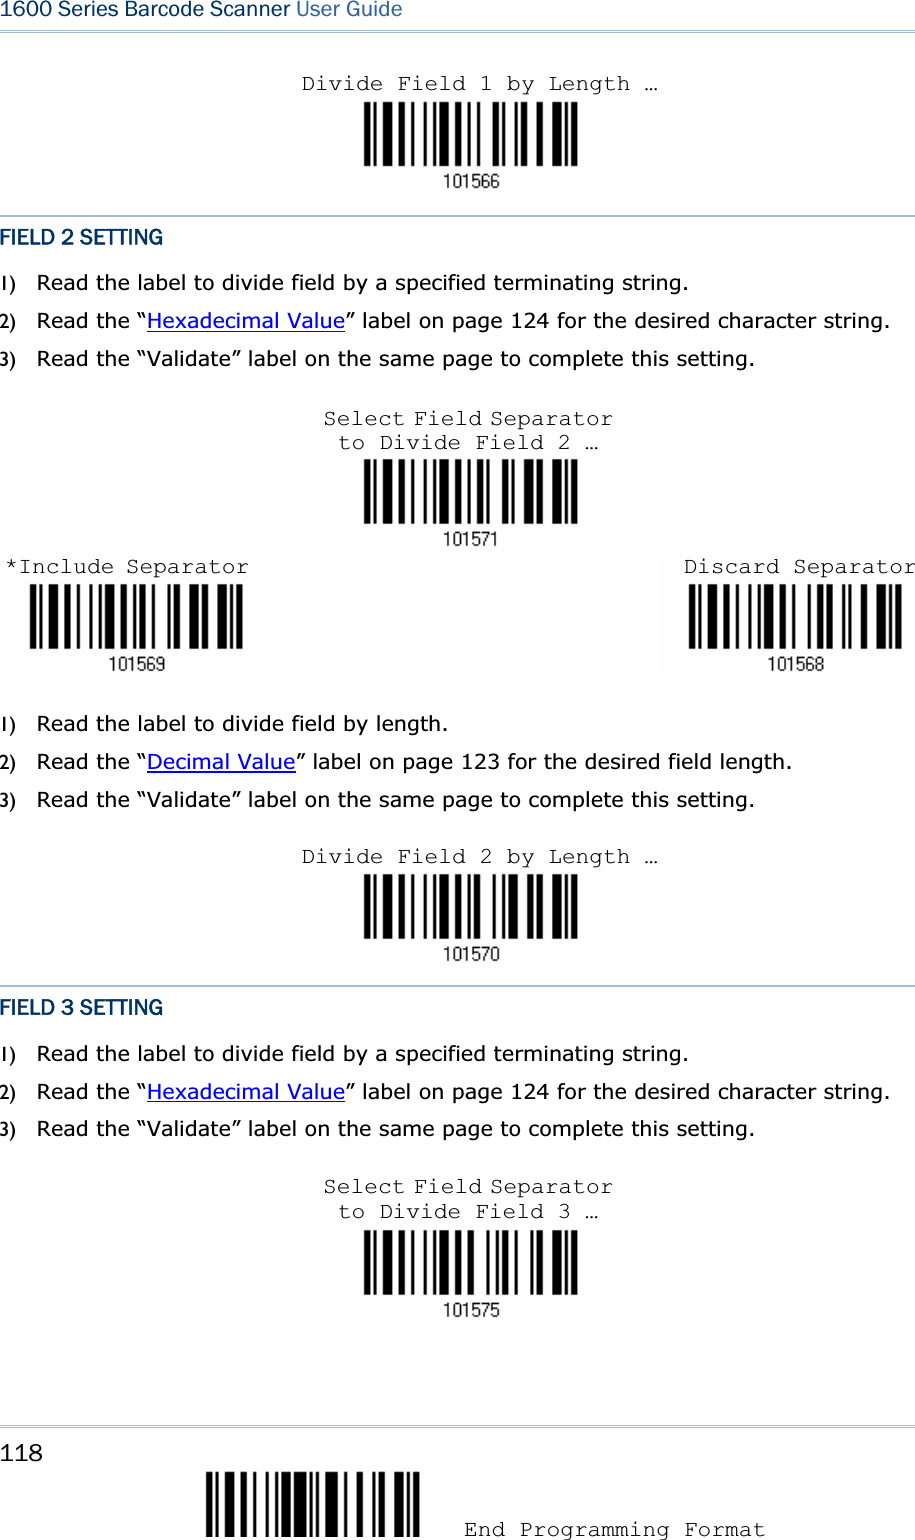 118 End Programming Format 1600 Series Barcode Scanner User GuideFIELD 2 SETTING 1) Read the label to divide field by a specified terminating string. 2) Read the “Hexadecimal Value” label on page 124 for the desired character string.   3) Read the “Validate” label on the same page to complete this setting. 1) Read the label to divide field by length. 2) Read the “Decimal Value” label on page 123 for the desired field length. 3) Read the “Validate” label on the same page to complete this setting. FIELD 3 SETTING 1) Read the label to divide field by a specified terminating string. 2) Read the “Hexadecimal Value” label on page 124 for the desired character string.   3) Read the “Validate” label on the same page to complete this setting. Divide Field 1 by Length …Select Field Separator to Divide Field 2 … *Include Separator Discard SeparatorDivide Field 2 by Length …Select Field Separator to Divide Field 3 … 